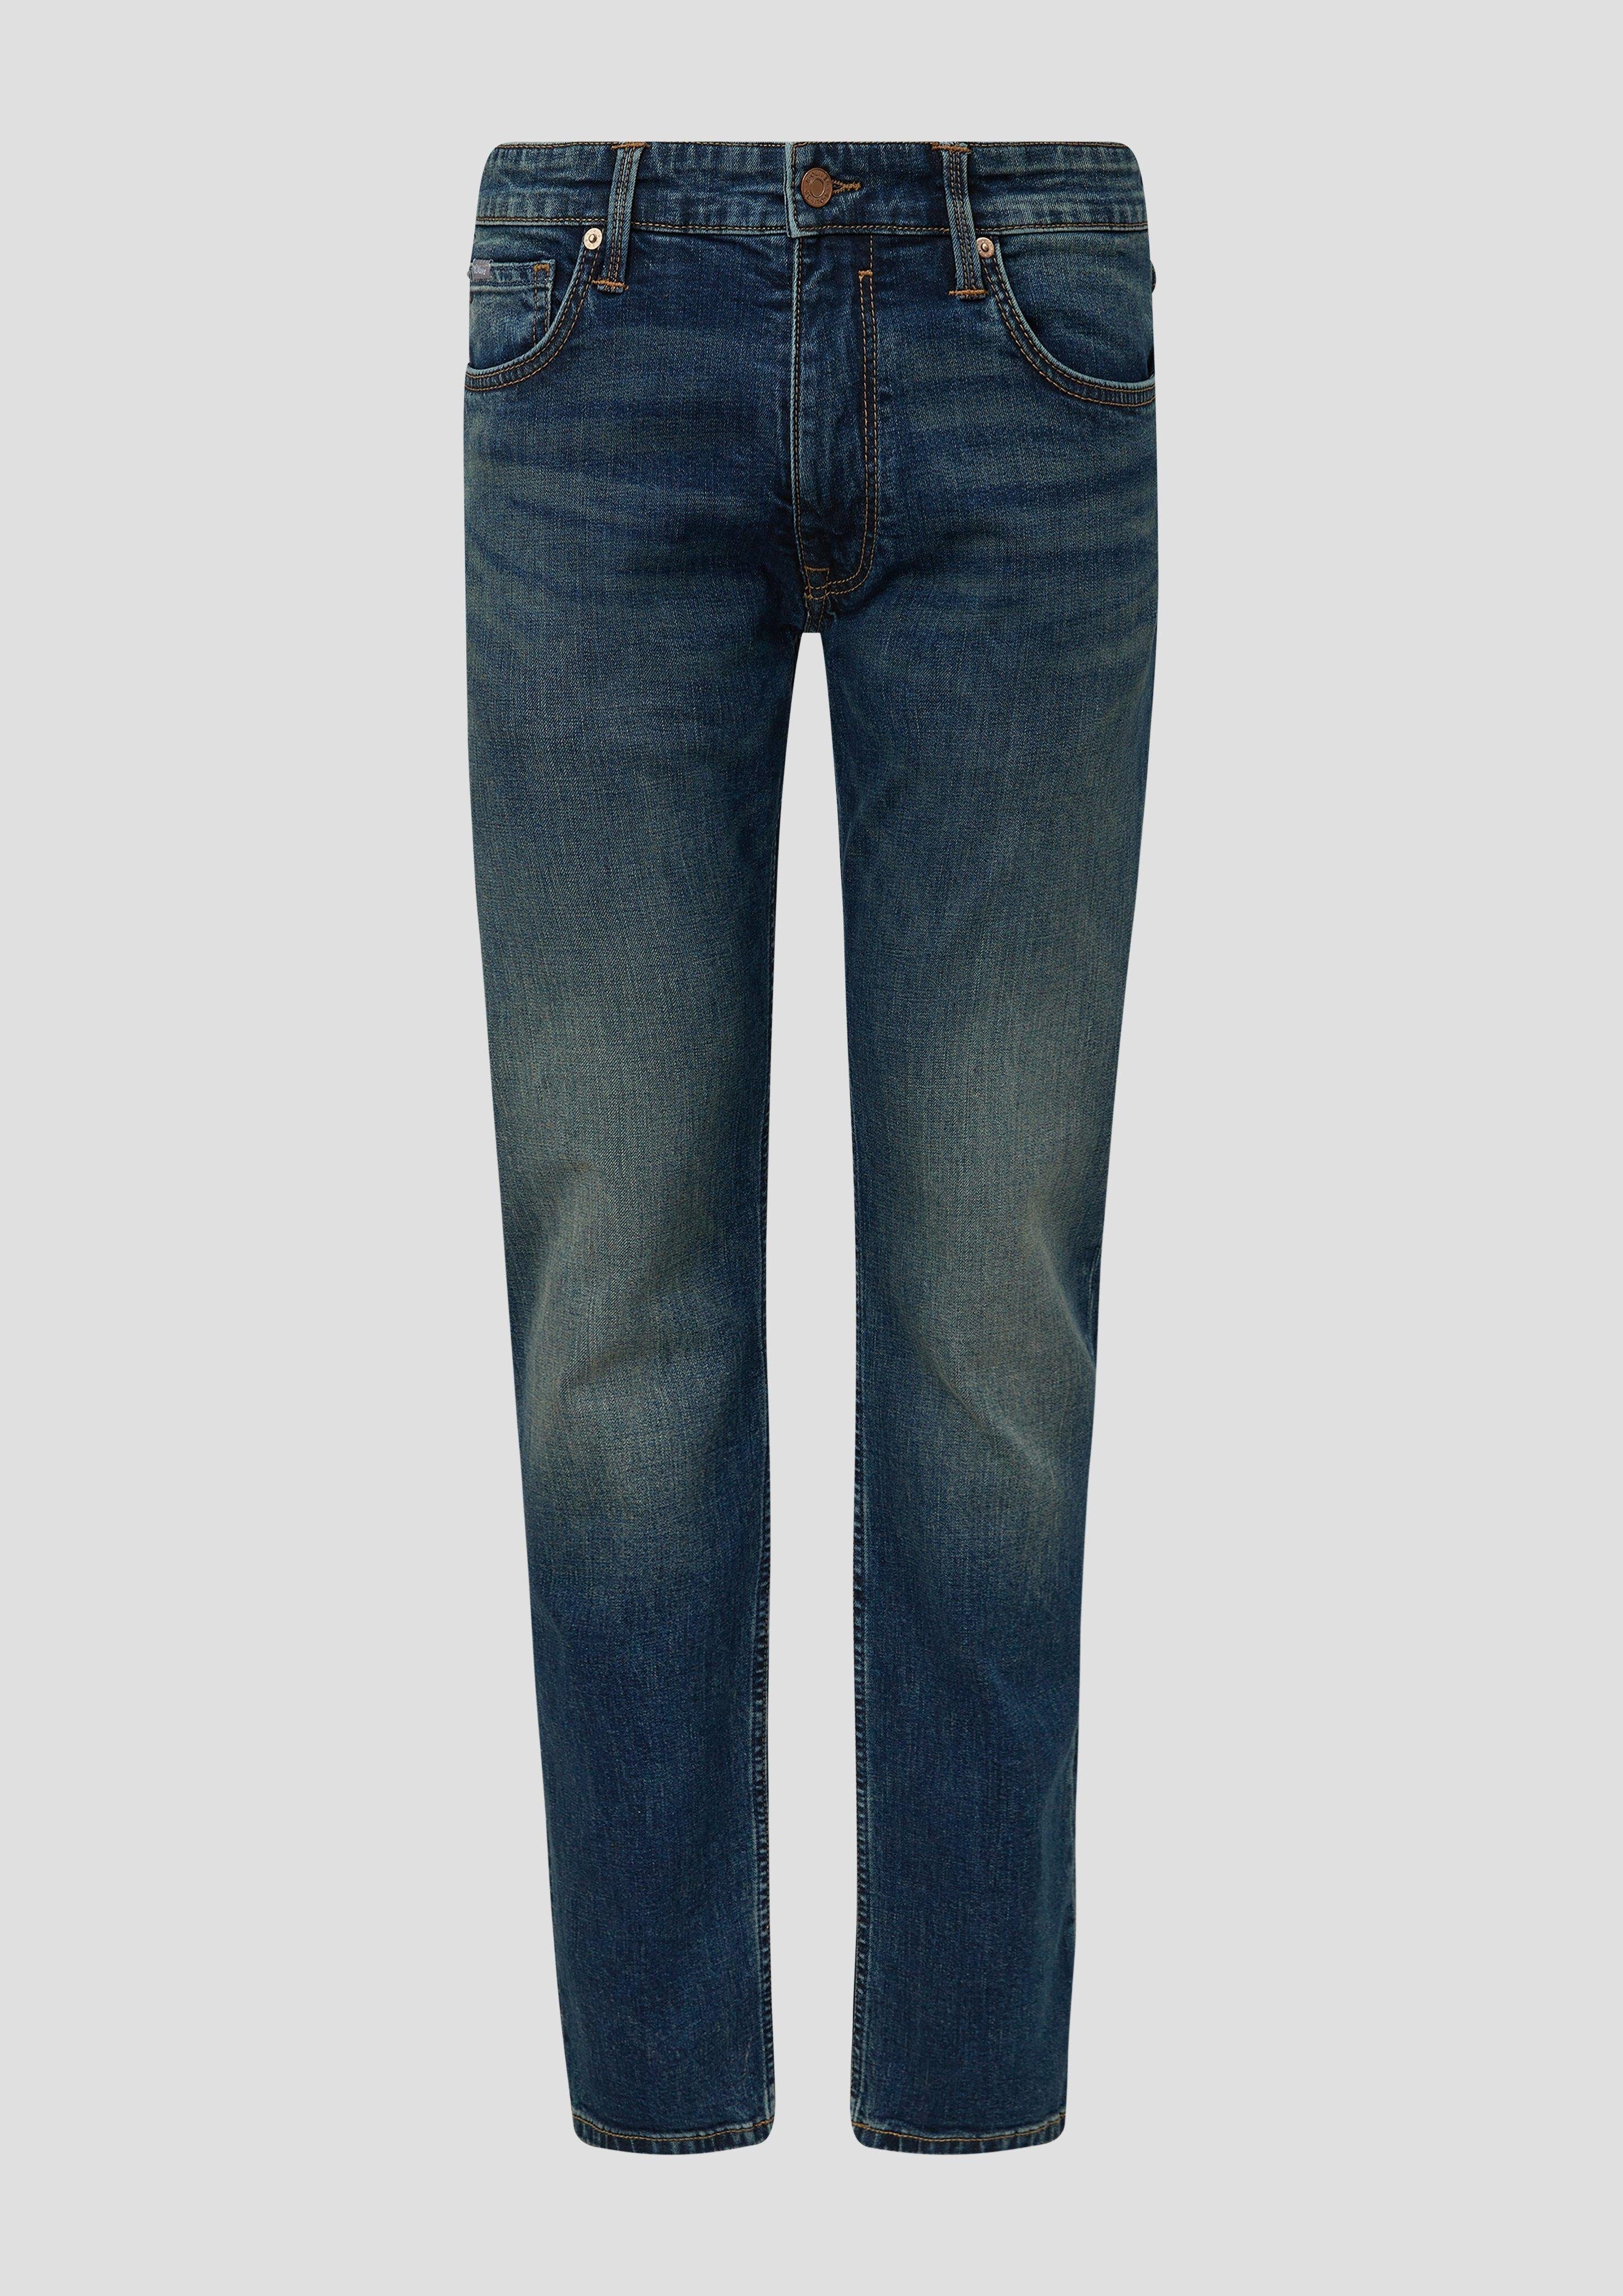 Label-Patch Slim / s.Oliver / Jeans Fit Stoffhose Straight Keith Mid Waschung, Leg / Rise